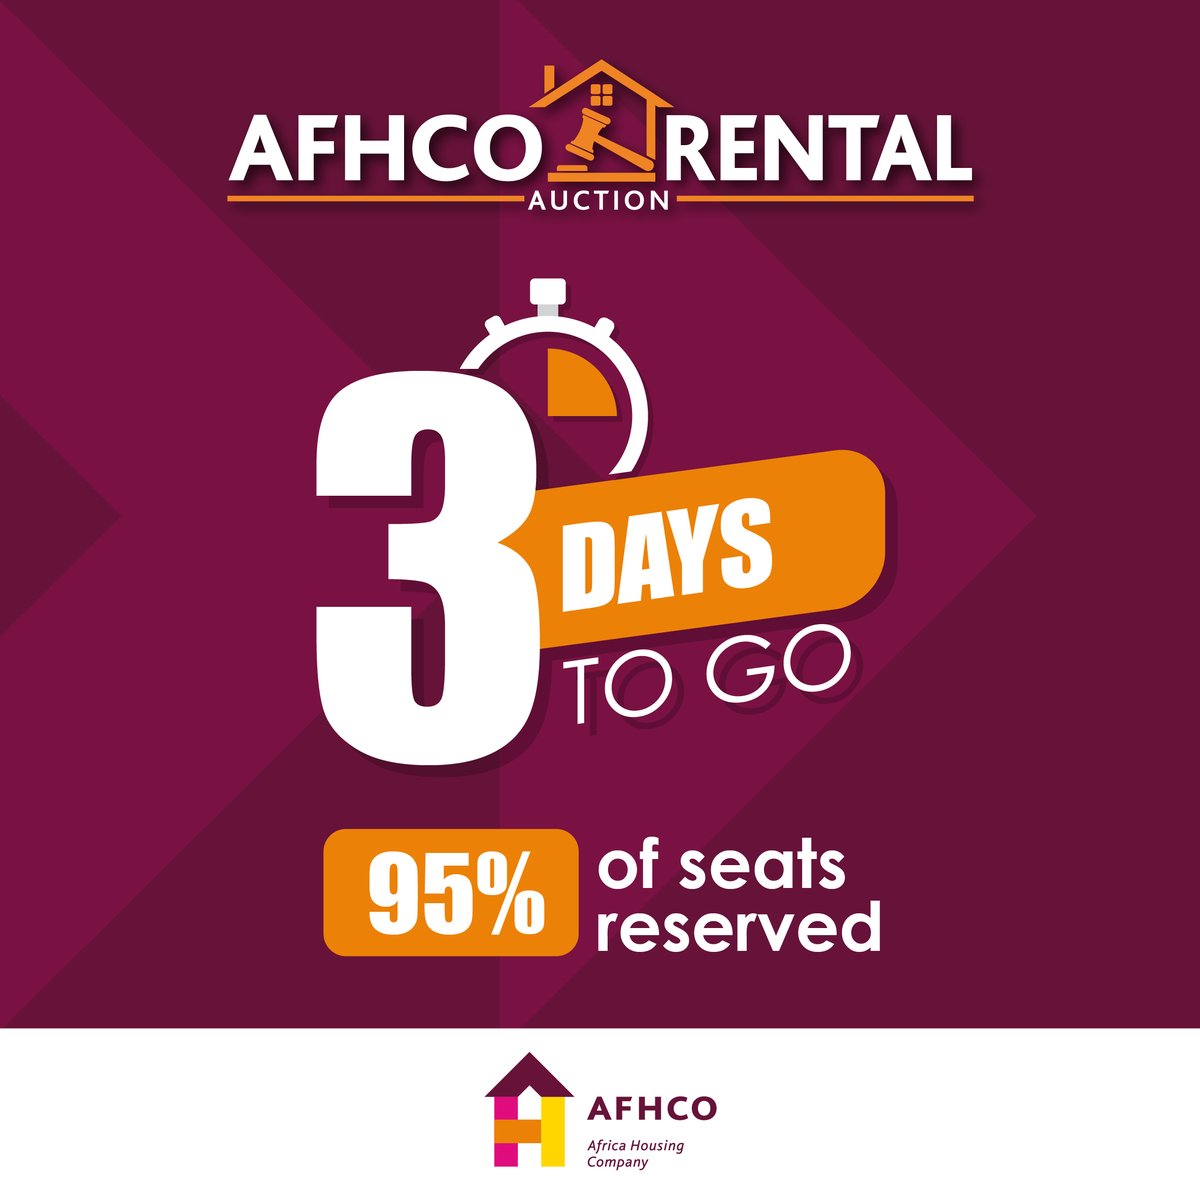 95% seats reserved! Don’t miss out! Secure your seat now! afhco.co.za/to-let/rental-… 
#Rental #AFHCORentalAuction #innercityrentals #cityliving #MoveUp #StaywithAFHCO #apartmentstolet #MoveUpwithAFHCO #AFHCO #propertymanagement #rent #apartments #johannesburg #gauteng #property